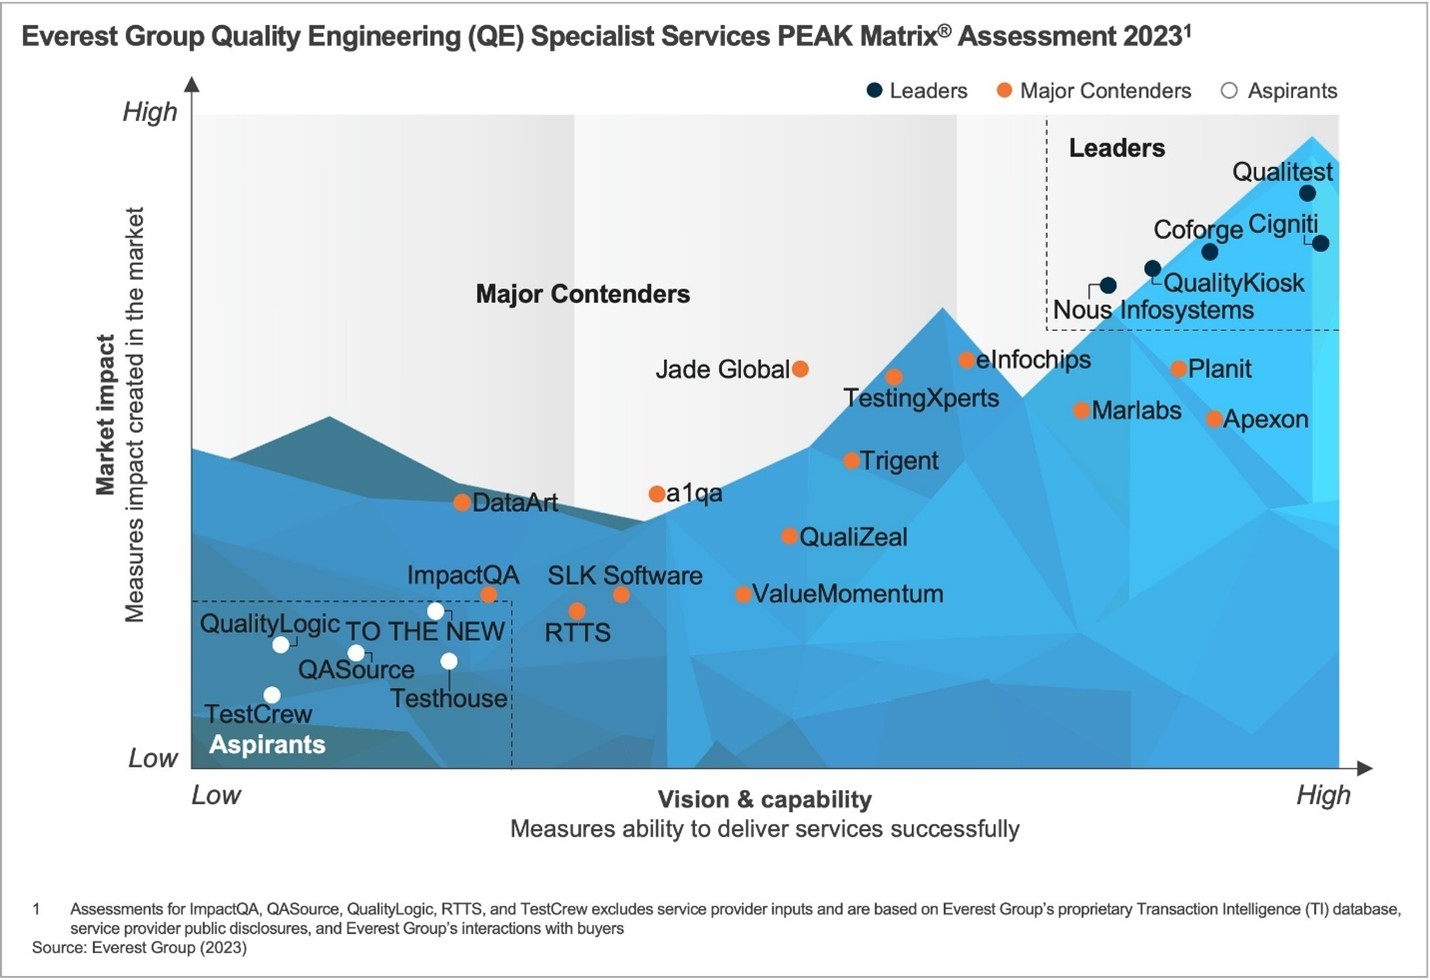 everest-group-quality-engineering-specialist-services-peak-matrix-assessment-2023